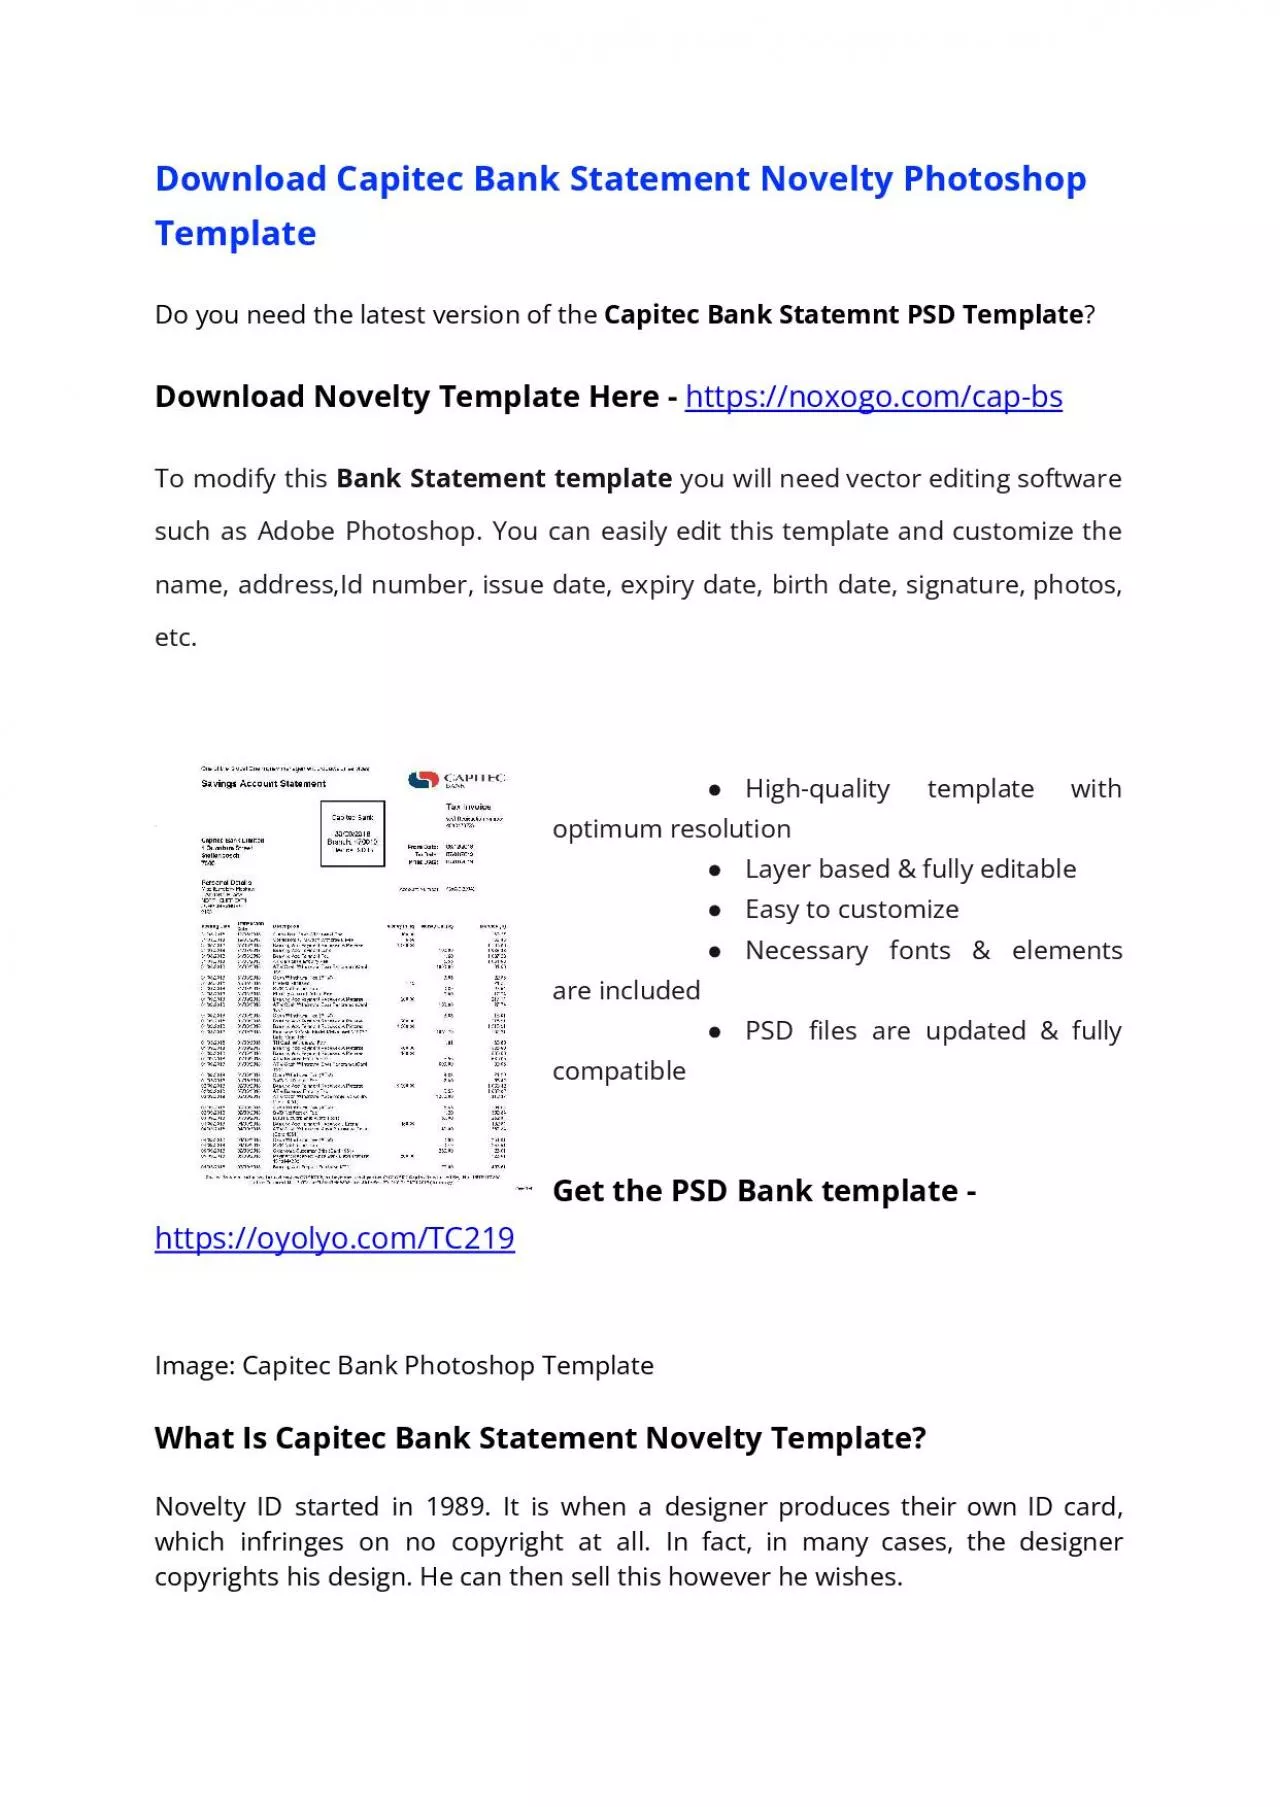 Capitec Bank Statement Template – Download MS Word File